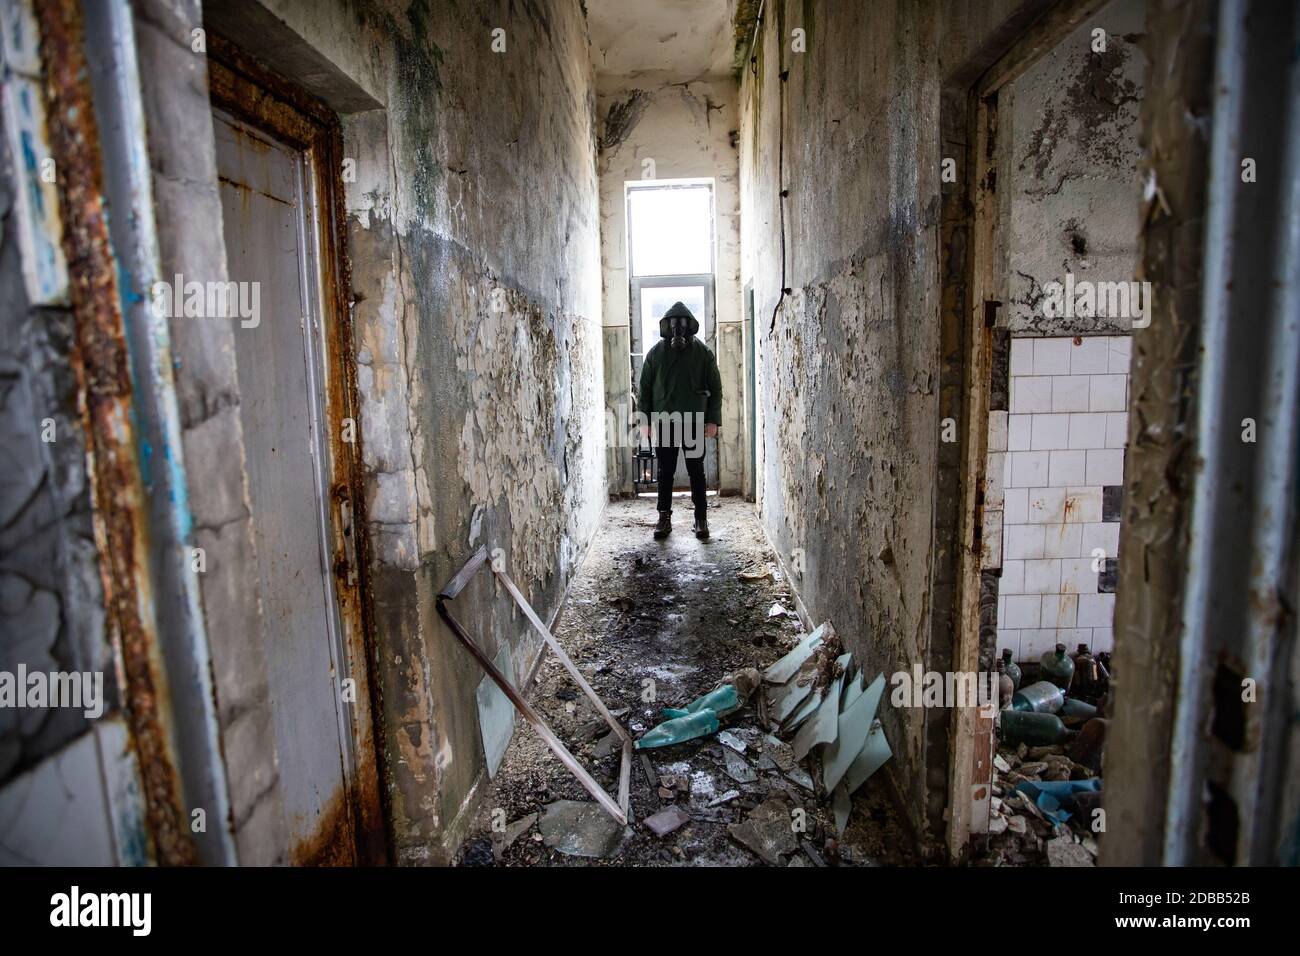 Post apocalyptic survivor in gas mask in a ruined building. Environmental disaster, armageddon concept. Stock Photo